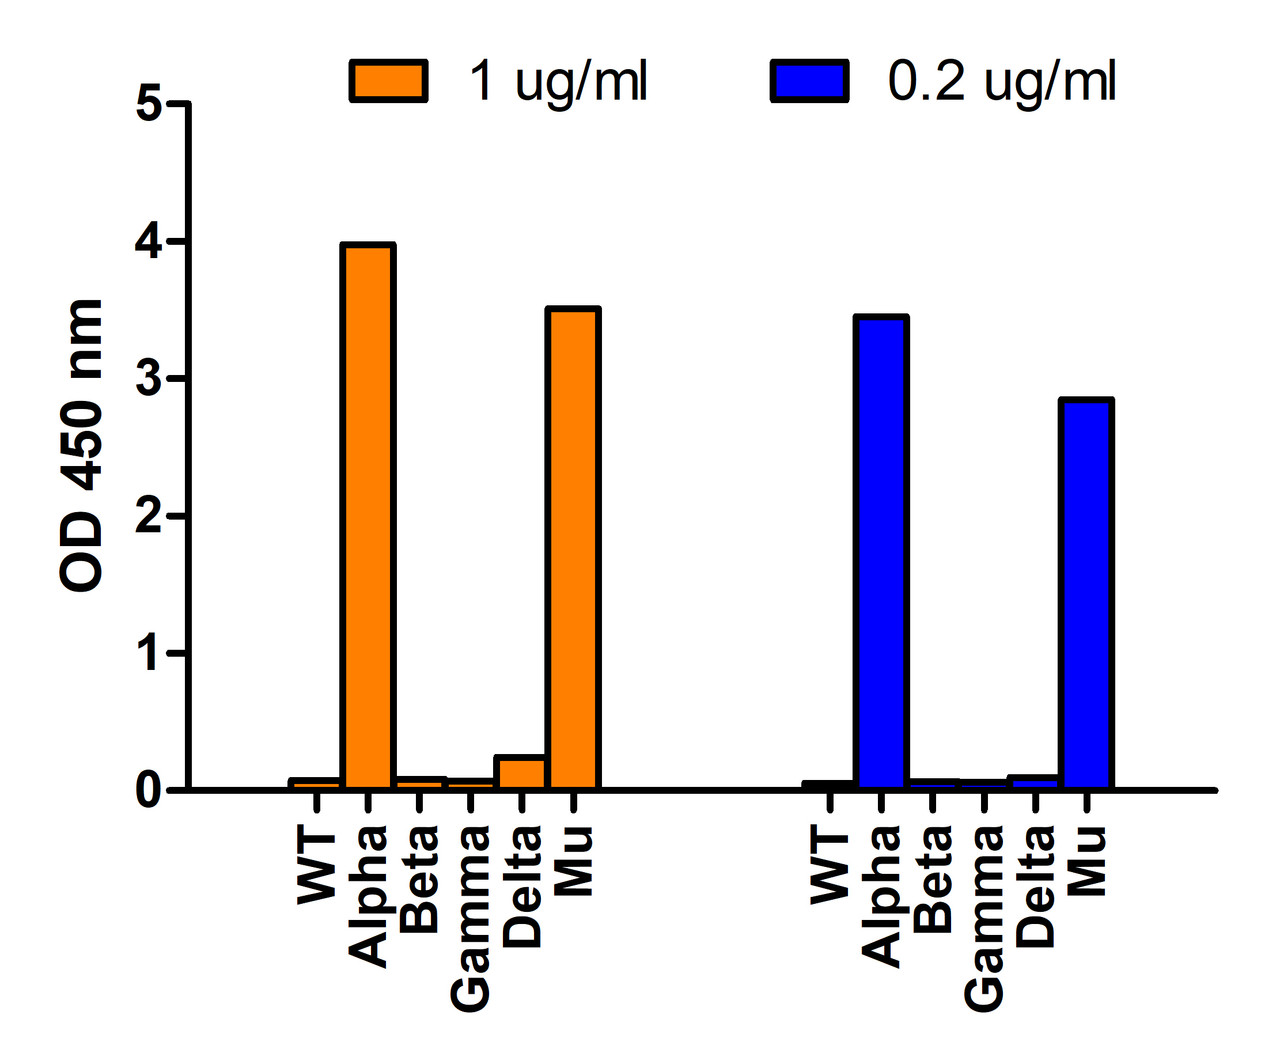 Figure 1 ELISA Validation of Alpha Variant Spike Antibodies with Spike S1 Protein of SARS-CoV-2 Variants 
Coating Antigen: SARS-CoV-2 spike S1 proteins WT, alpha variant (B.1.1.7) , beta variant (B.1.351) , gamma variant (P.1) , delta variant (B.1.617.2) , and mu variant (B.1.621) , 1 &#956;g/mL, incubate at 4 &#730;C overnight.
Detection Antibodies: SARS-CoV-2 Alpha Variant Spike antibody, 9359, dilution: 200-1000 ng/mL, incubate at RT for 1 hr.
Secondary Antibodies: Goat anti-rabbit HRP at 1:20, 000, incubate at RT for 1 hr.
SARS-CoV-2 alpha variant spike antibody (9359) can specifically detect alpha variant spike S1 protein, but not spike S1 protein of WT and other tested variants by ELISA. </strong>